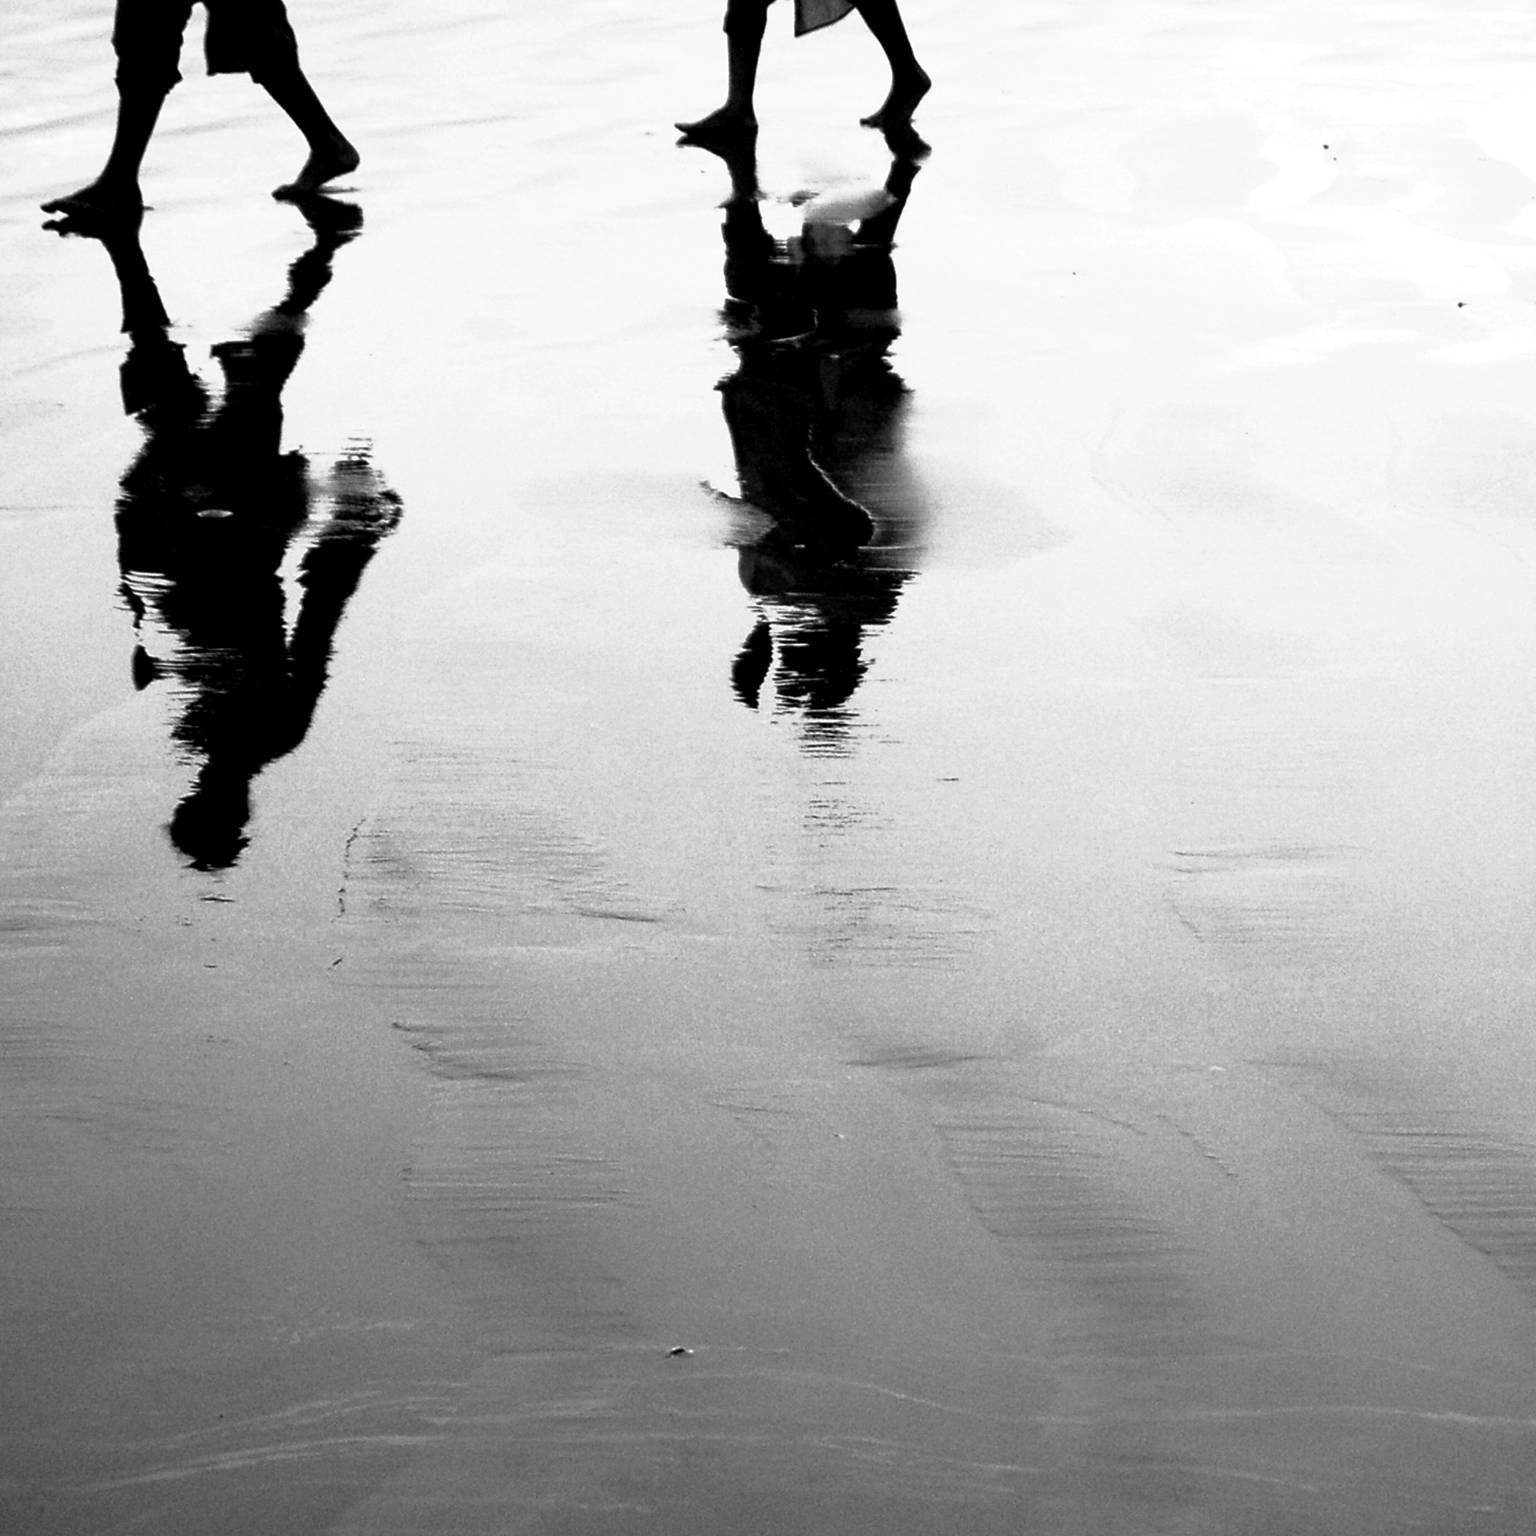 Walking in a Sea Beach, Black & White Photography by Indian Artist 